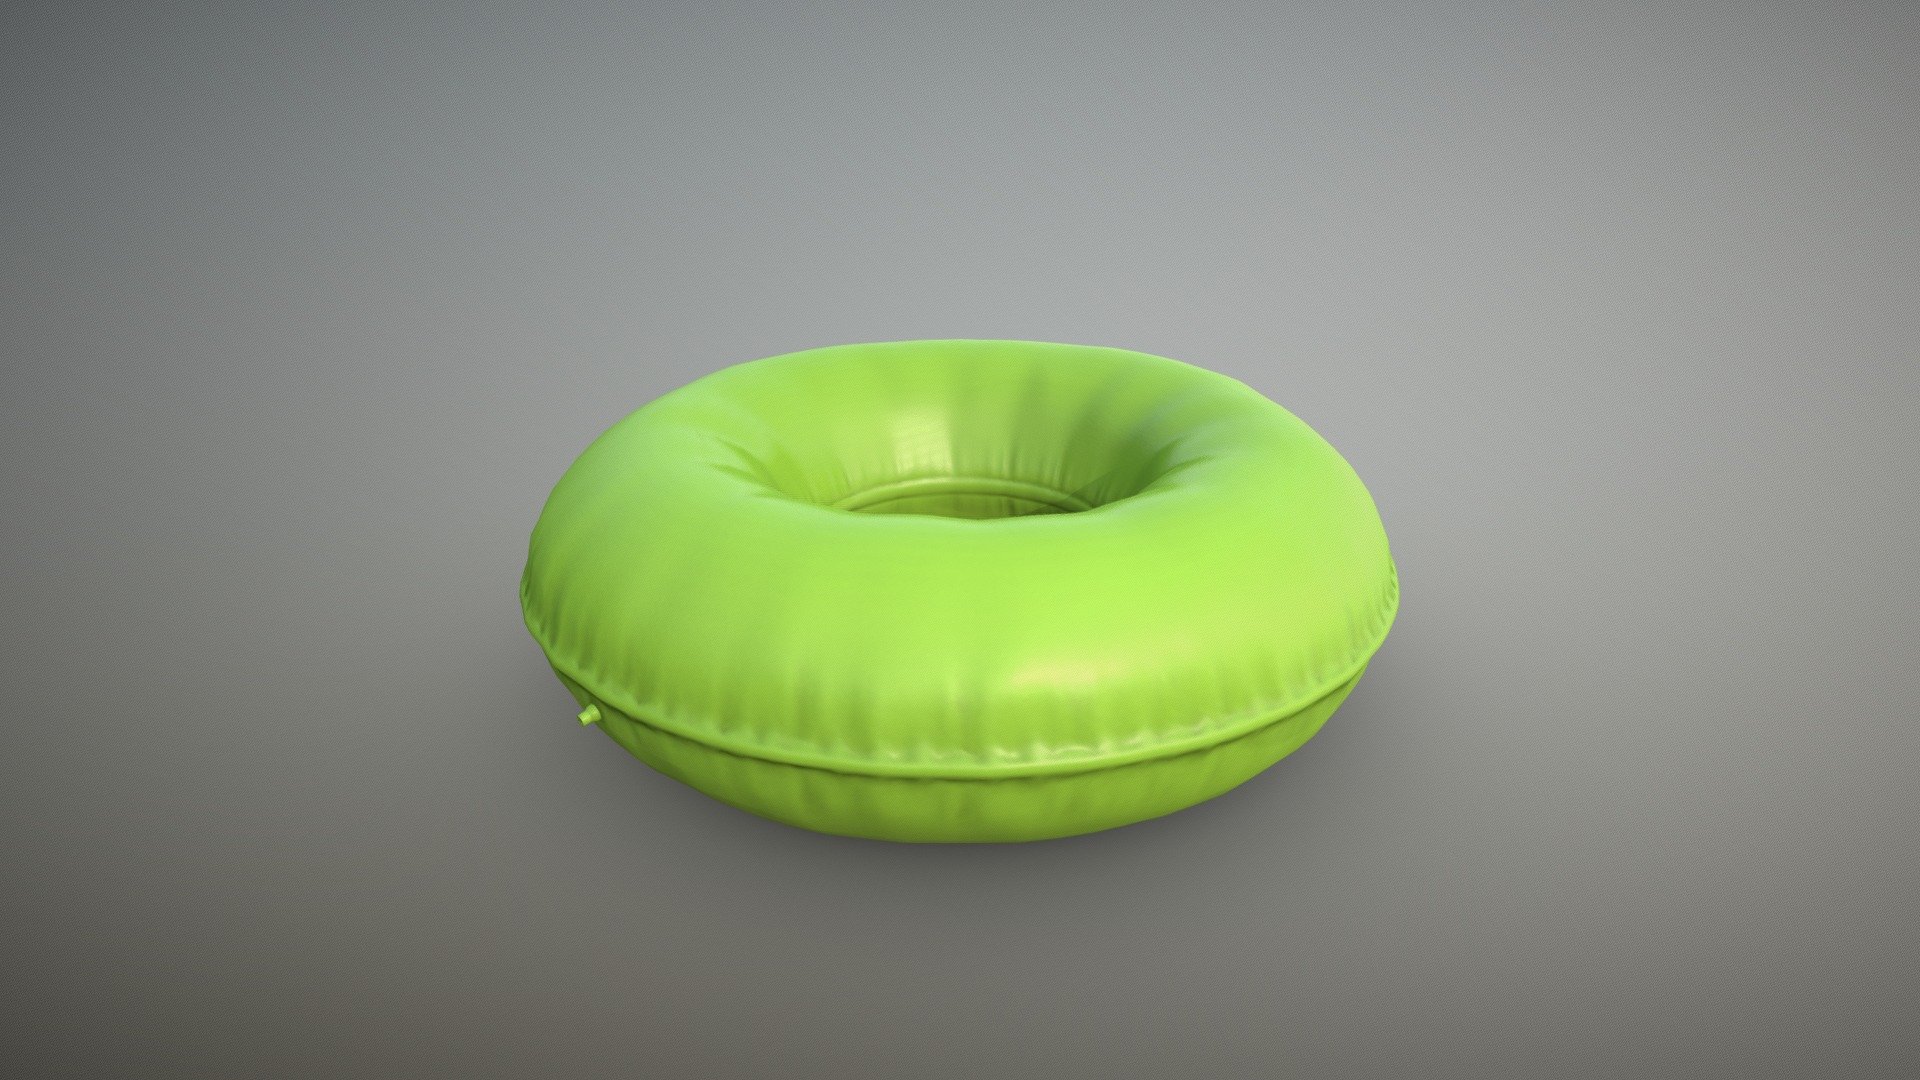 Floatie donut.

Made in Blender and textured in Substance Painter.

1024x1024 textures used 3d model